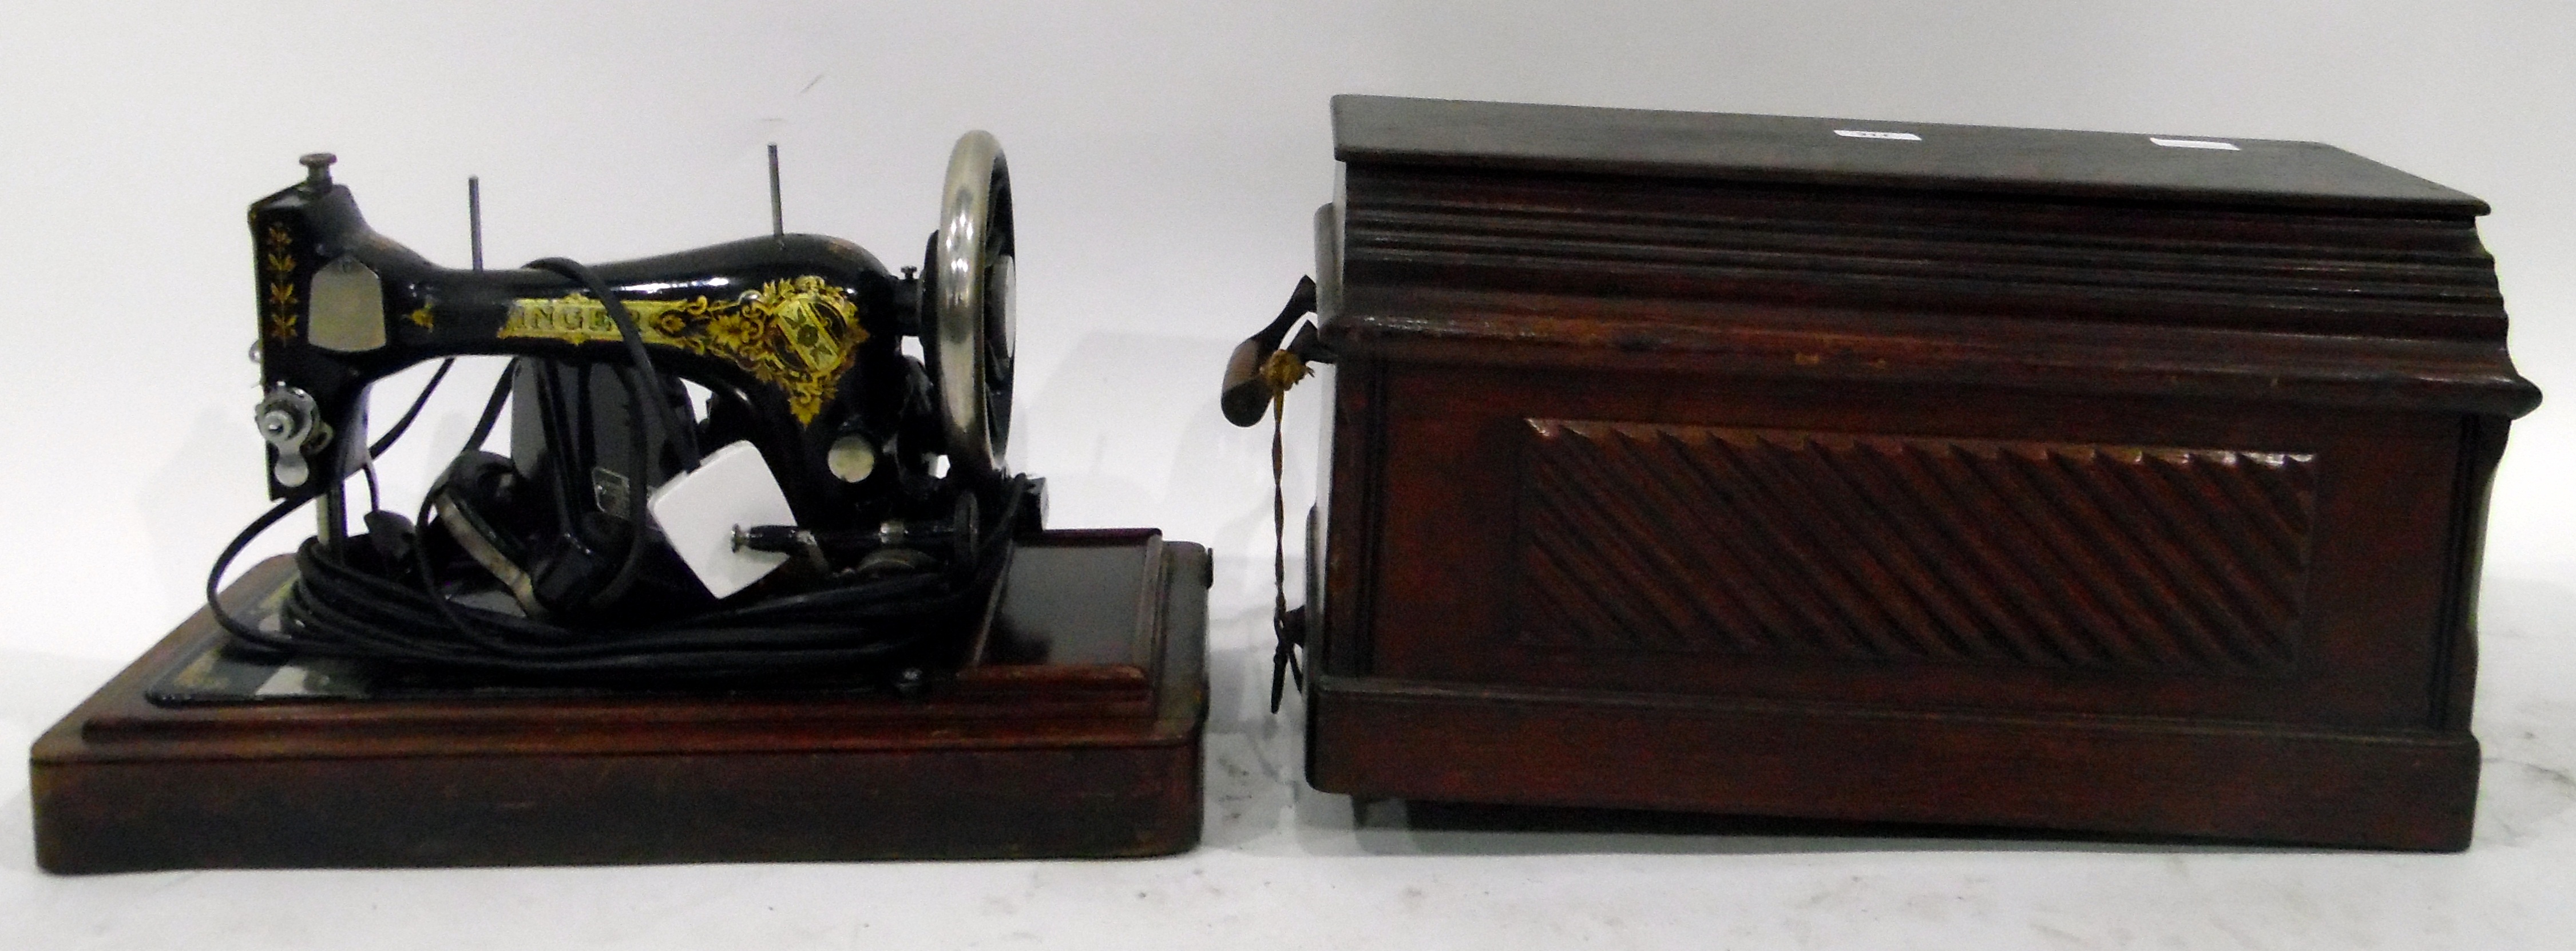 1905 Singer portable sewing machine in original oak case, with receipt, no. - Image 2 of 2